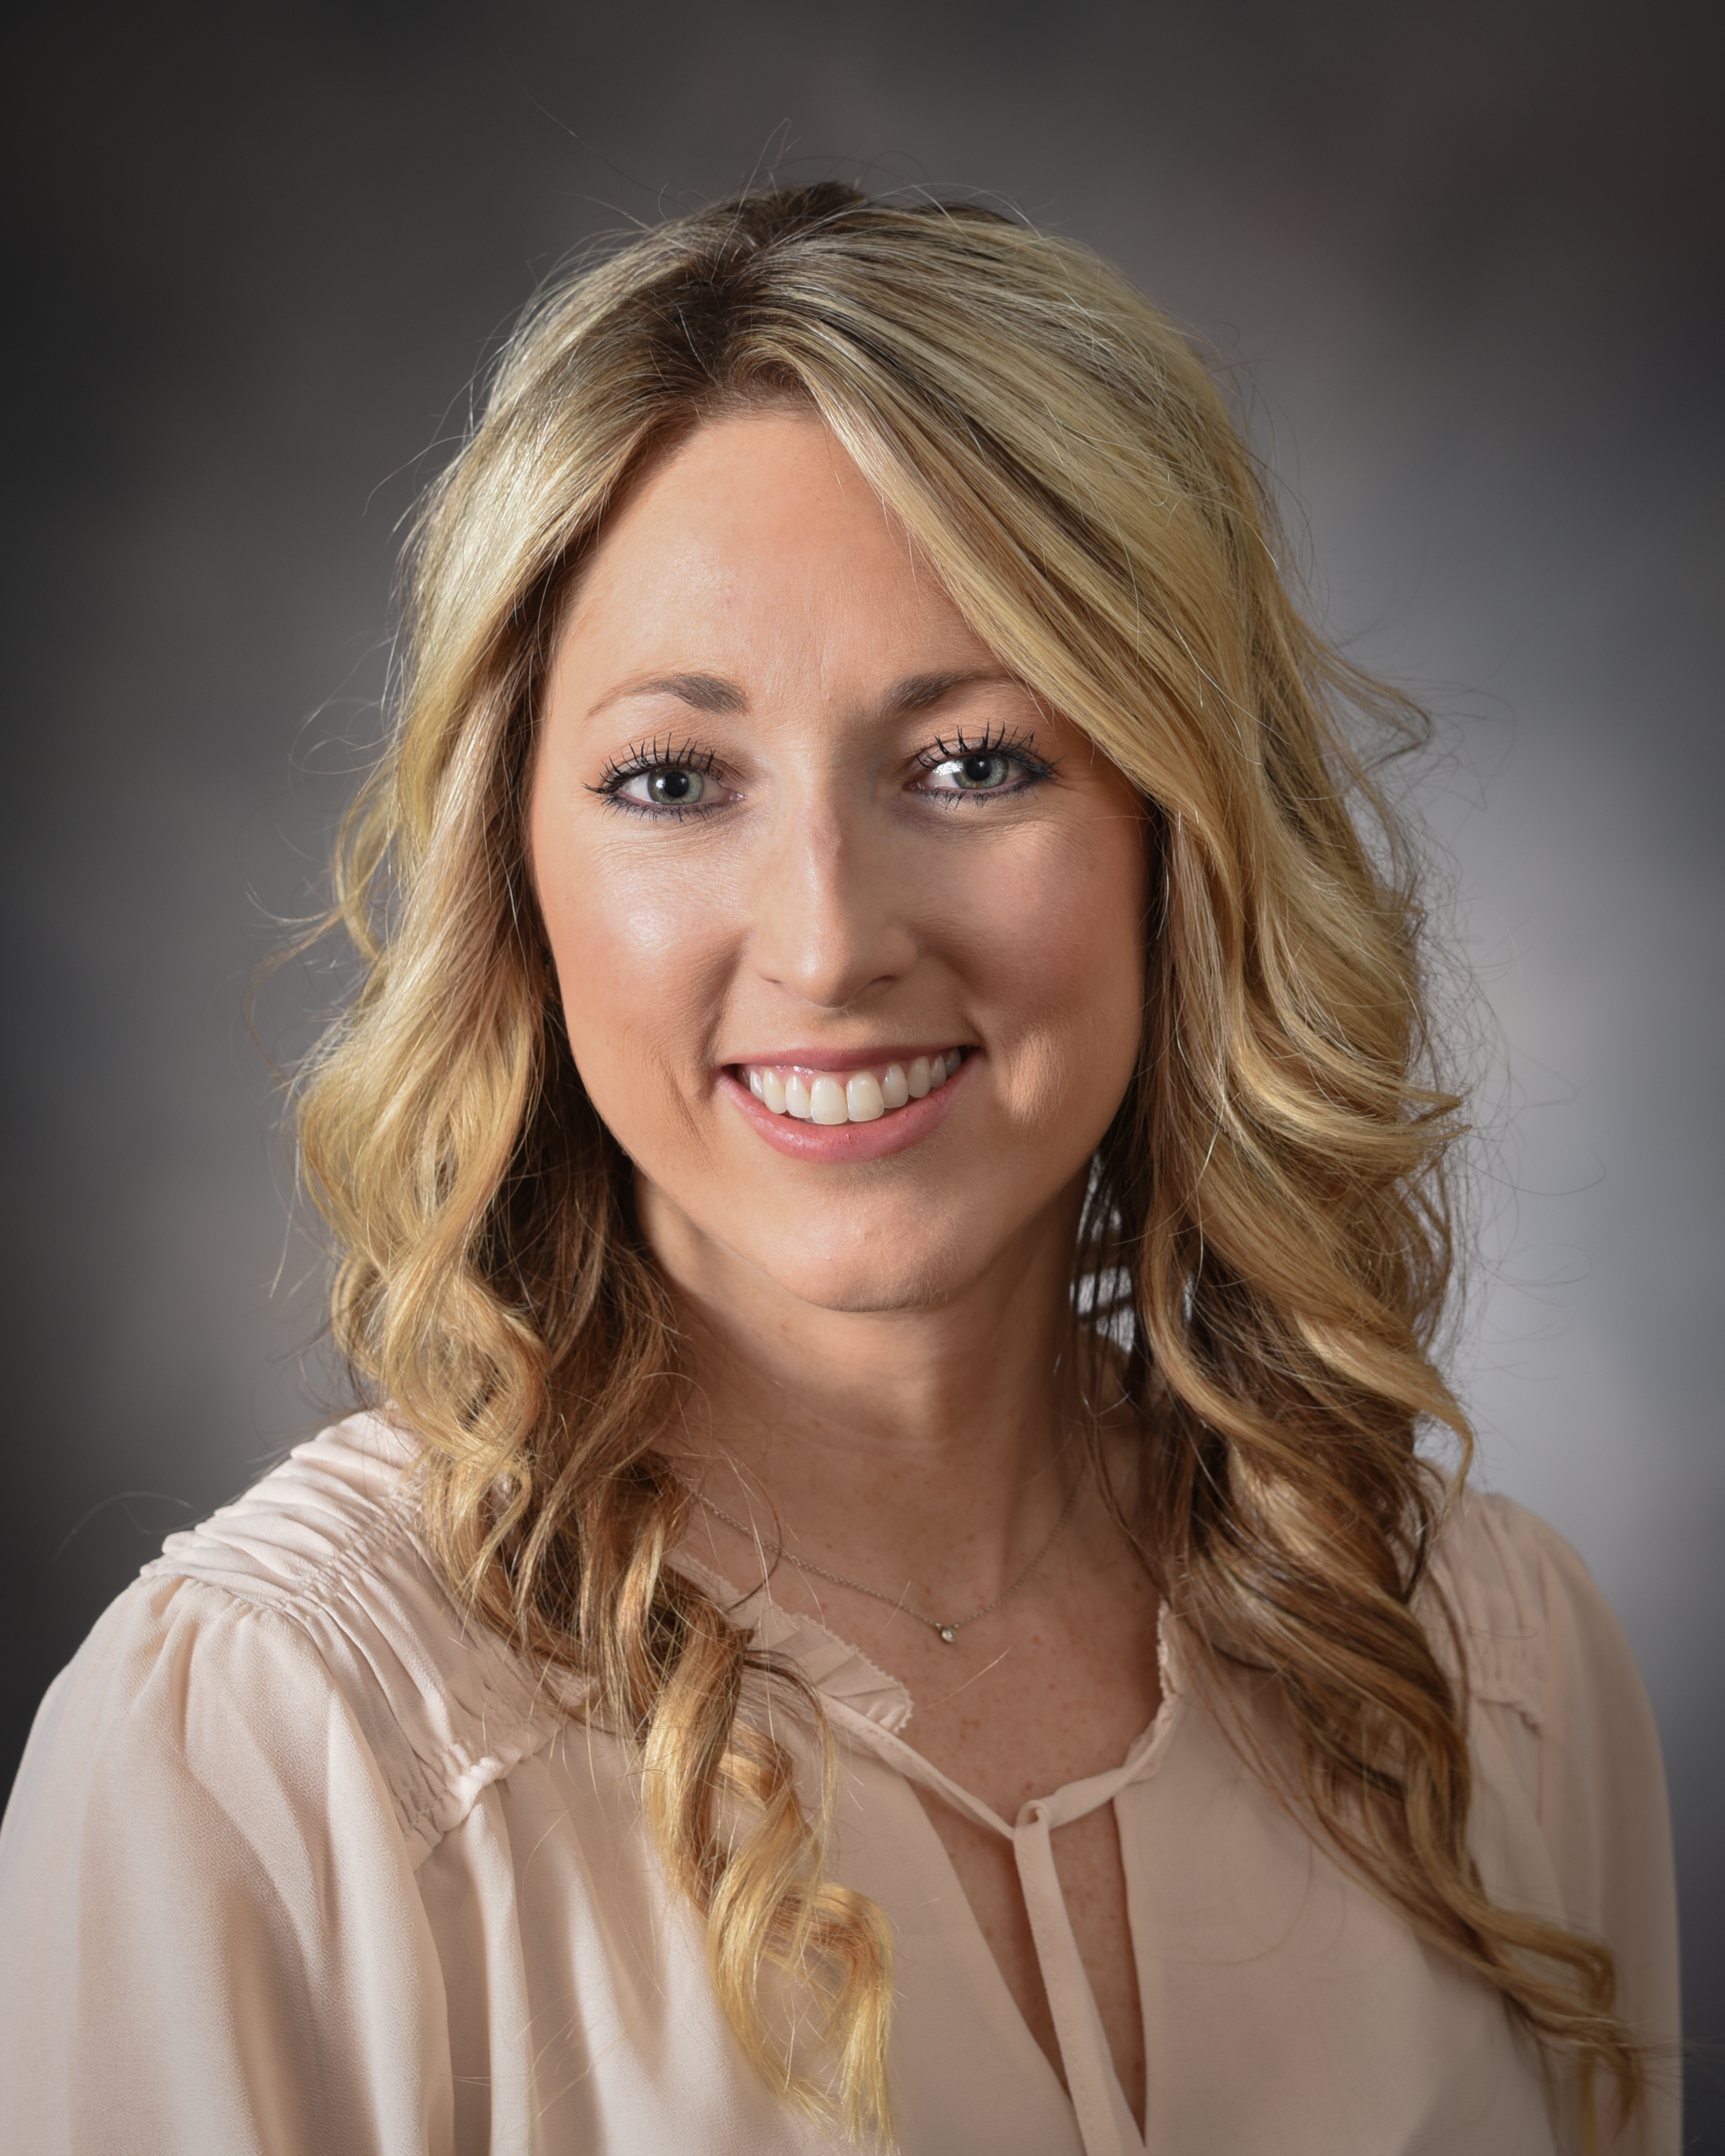 Brooke Skaggs, PA-C is selected as new Director of APPs in Surgery